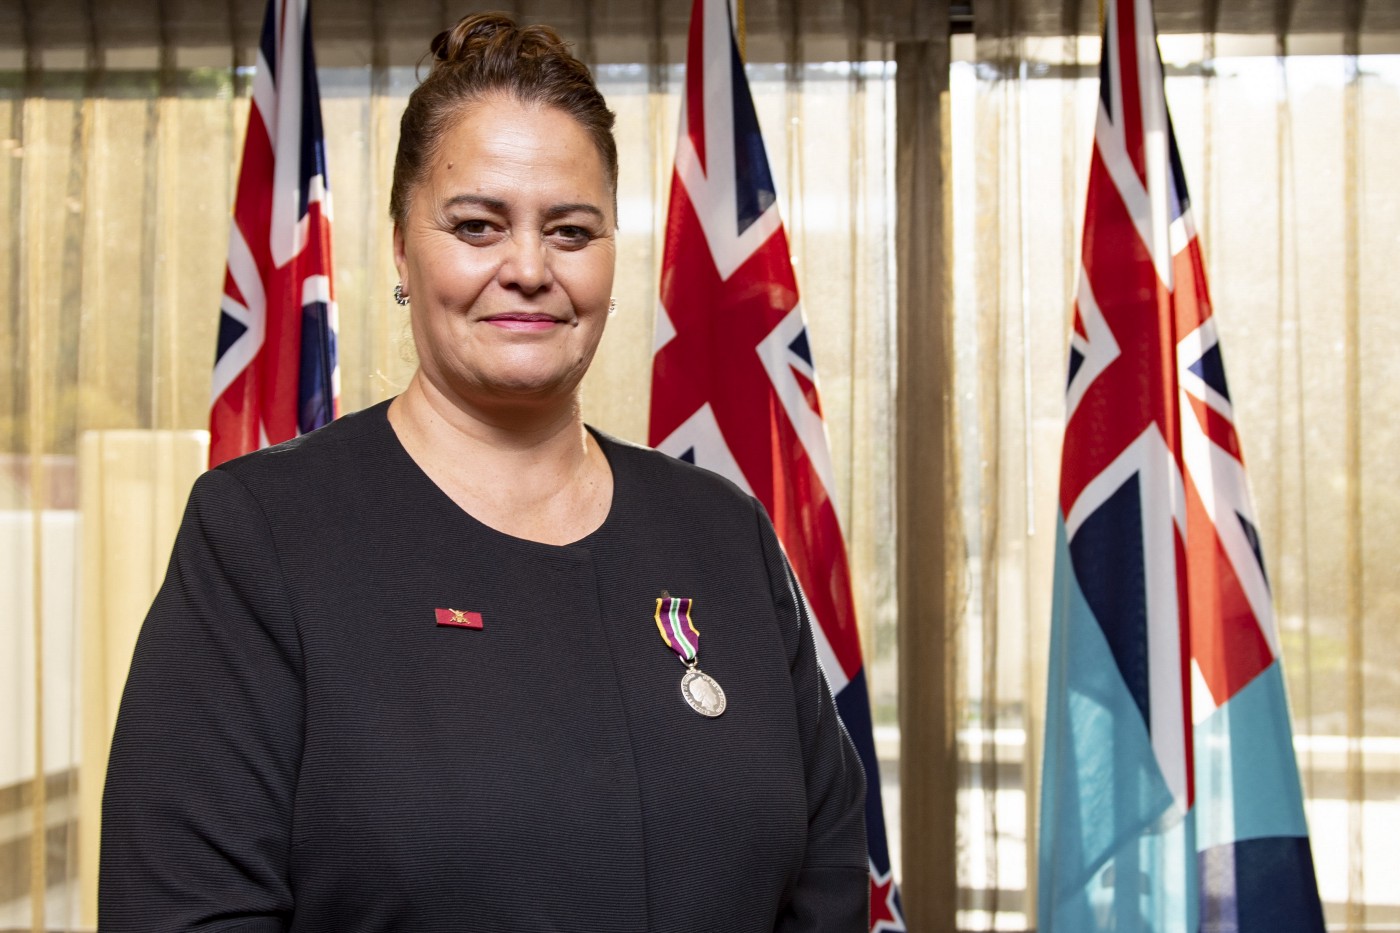 Lower Hutt woman Elaine Myers-Davies has been recognised by the New Zealand Defence Force (NZDF) for her work planning the annual Anzac Day commemorations in Gallipoli